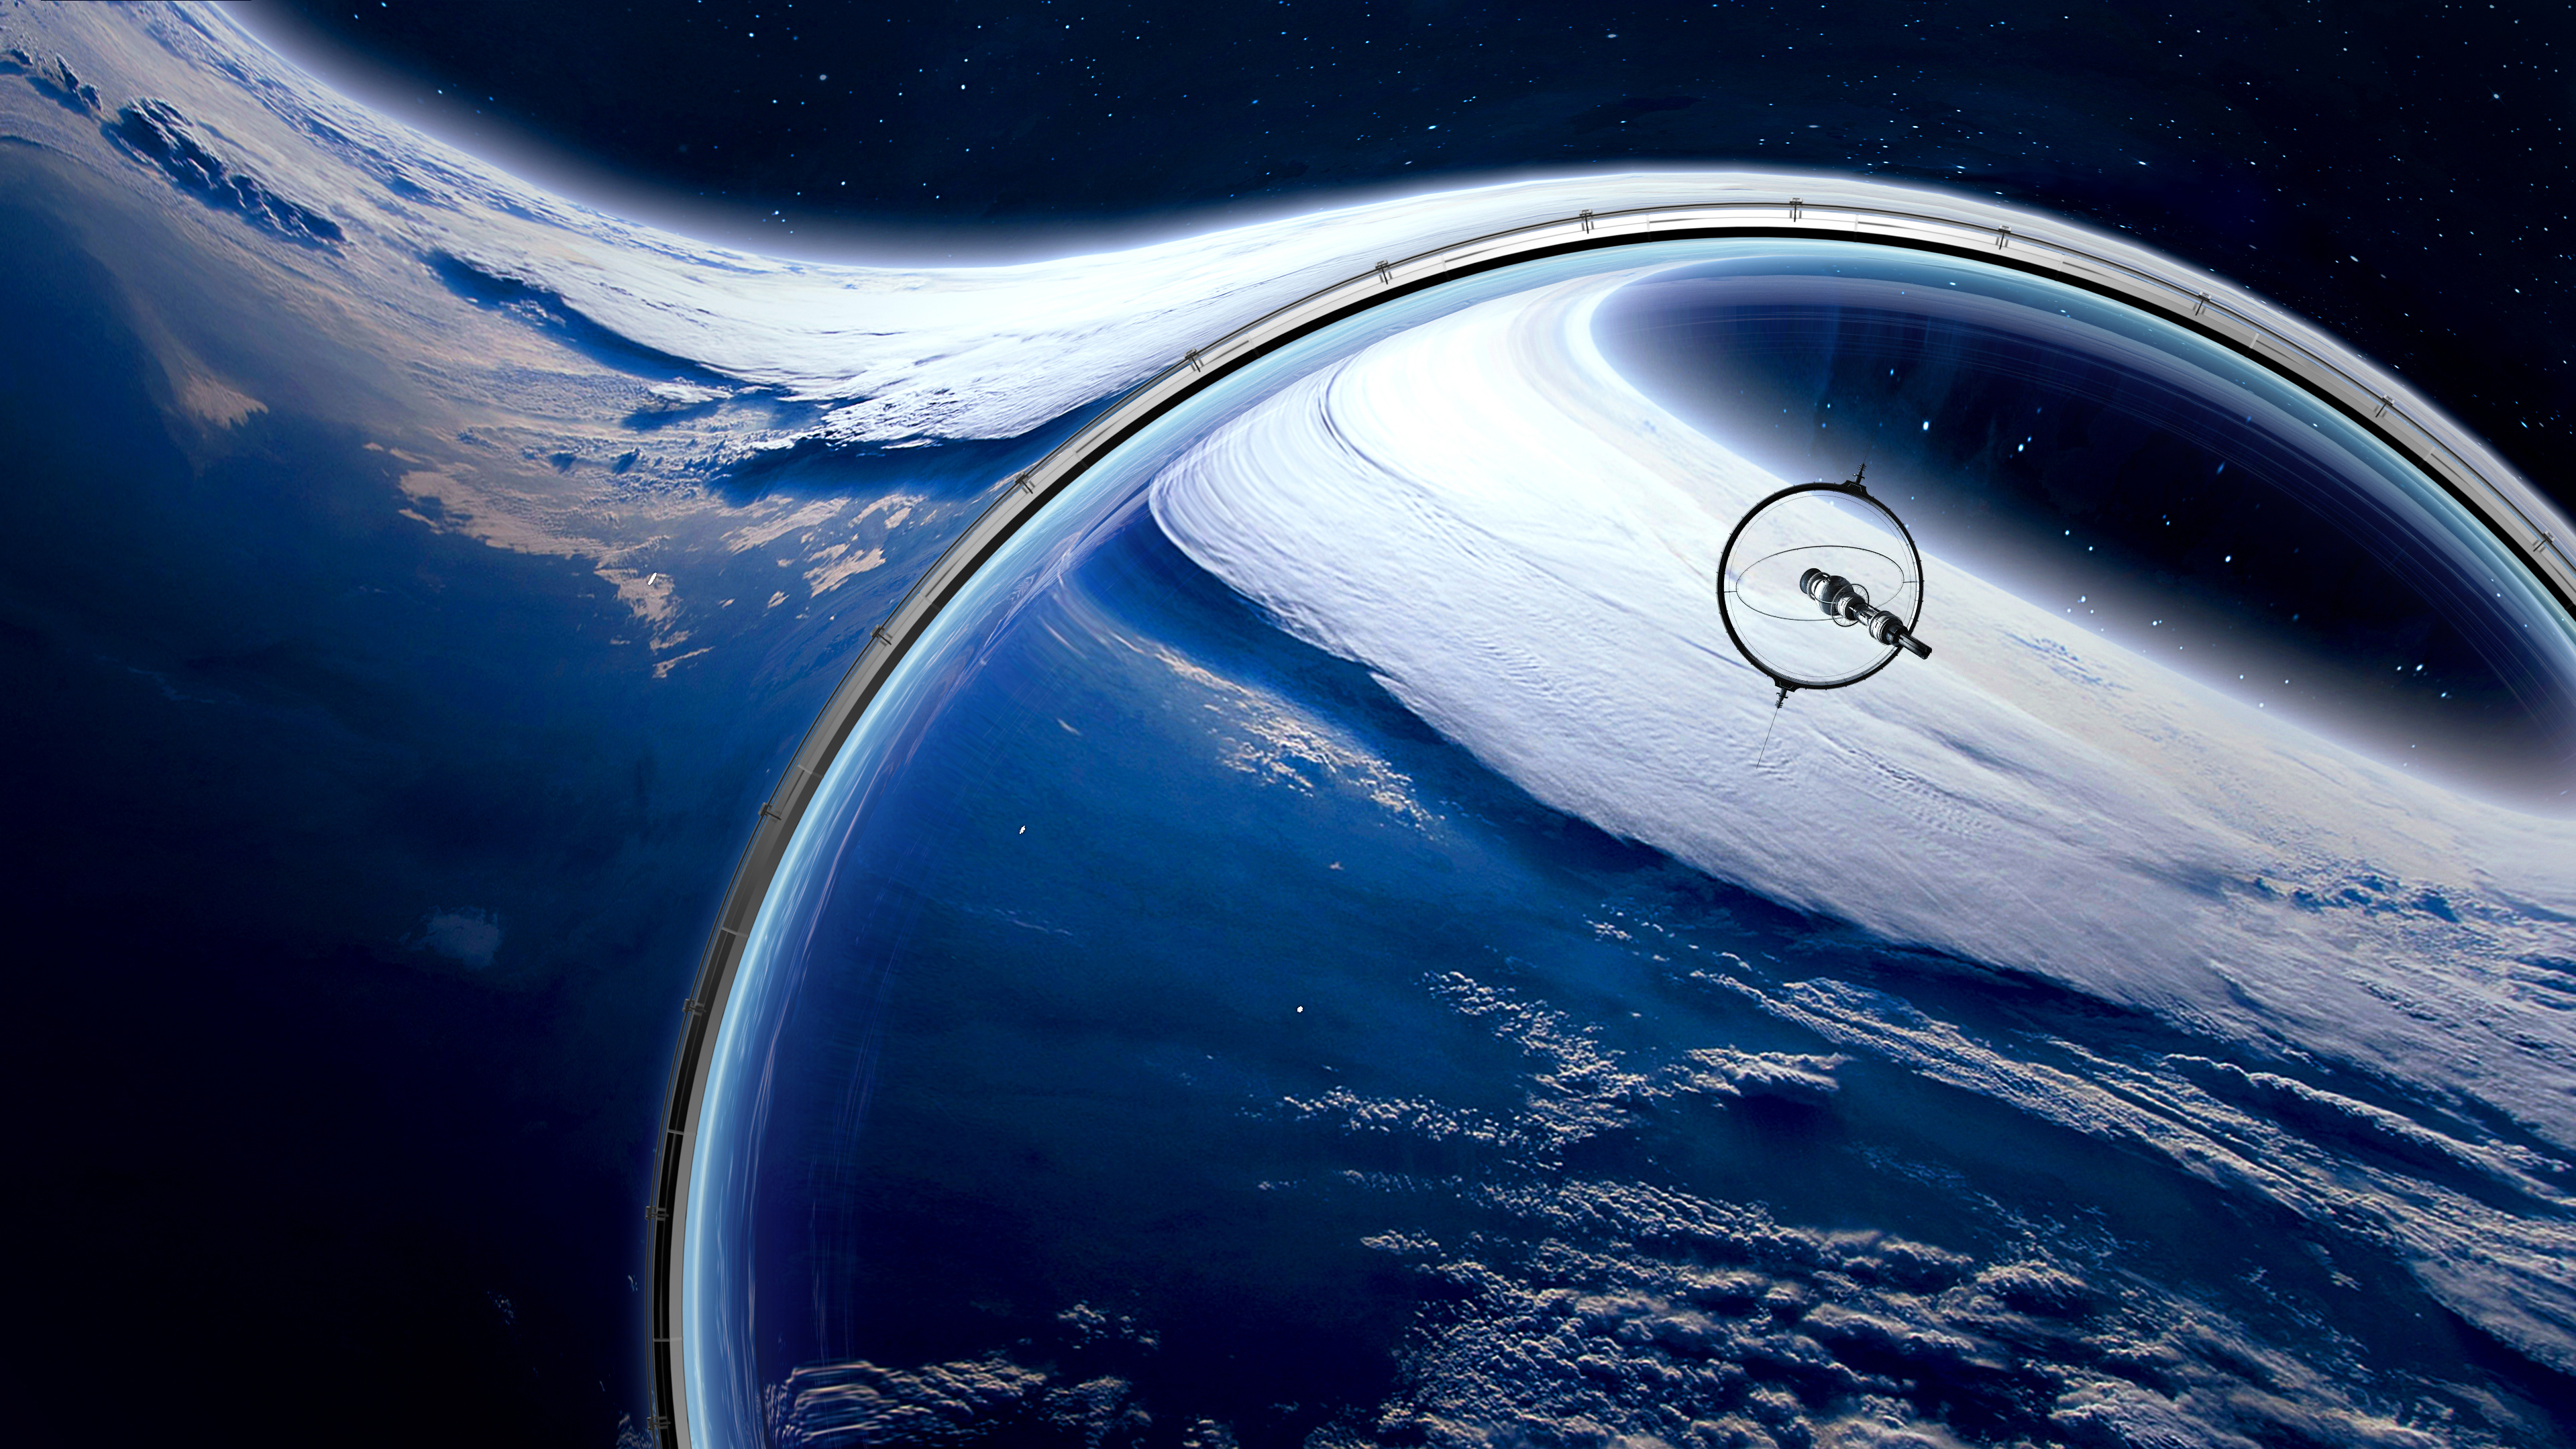 Outer space Wallpaper 4K, Orbit, Wormhole, Cosmos, Space, #7636